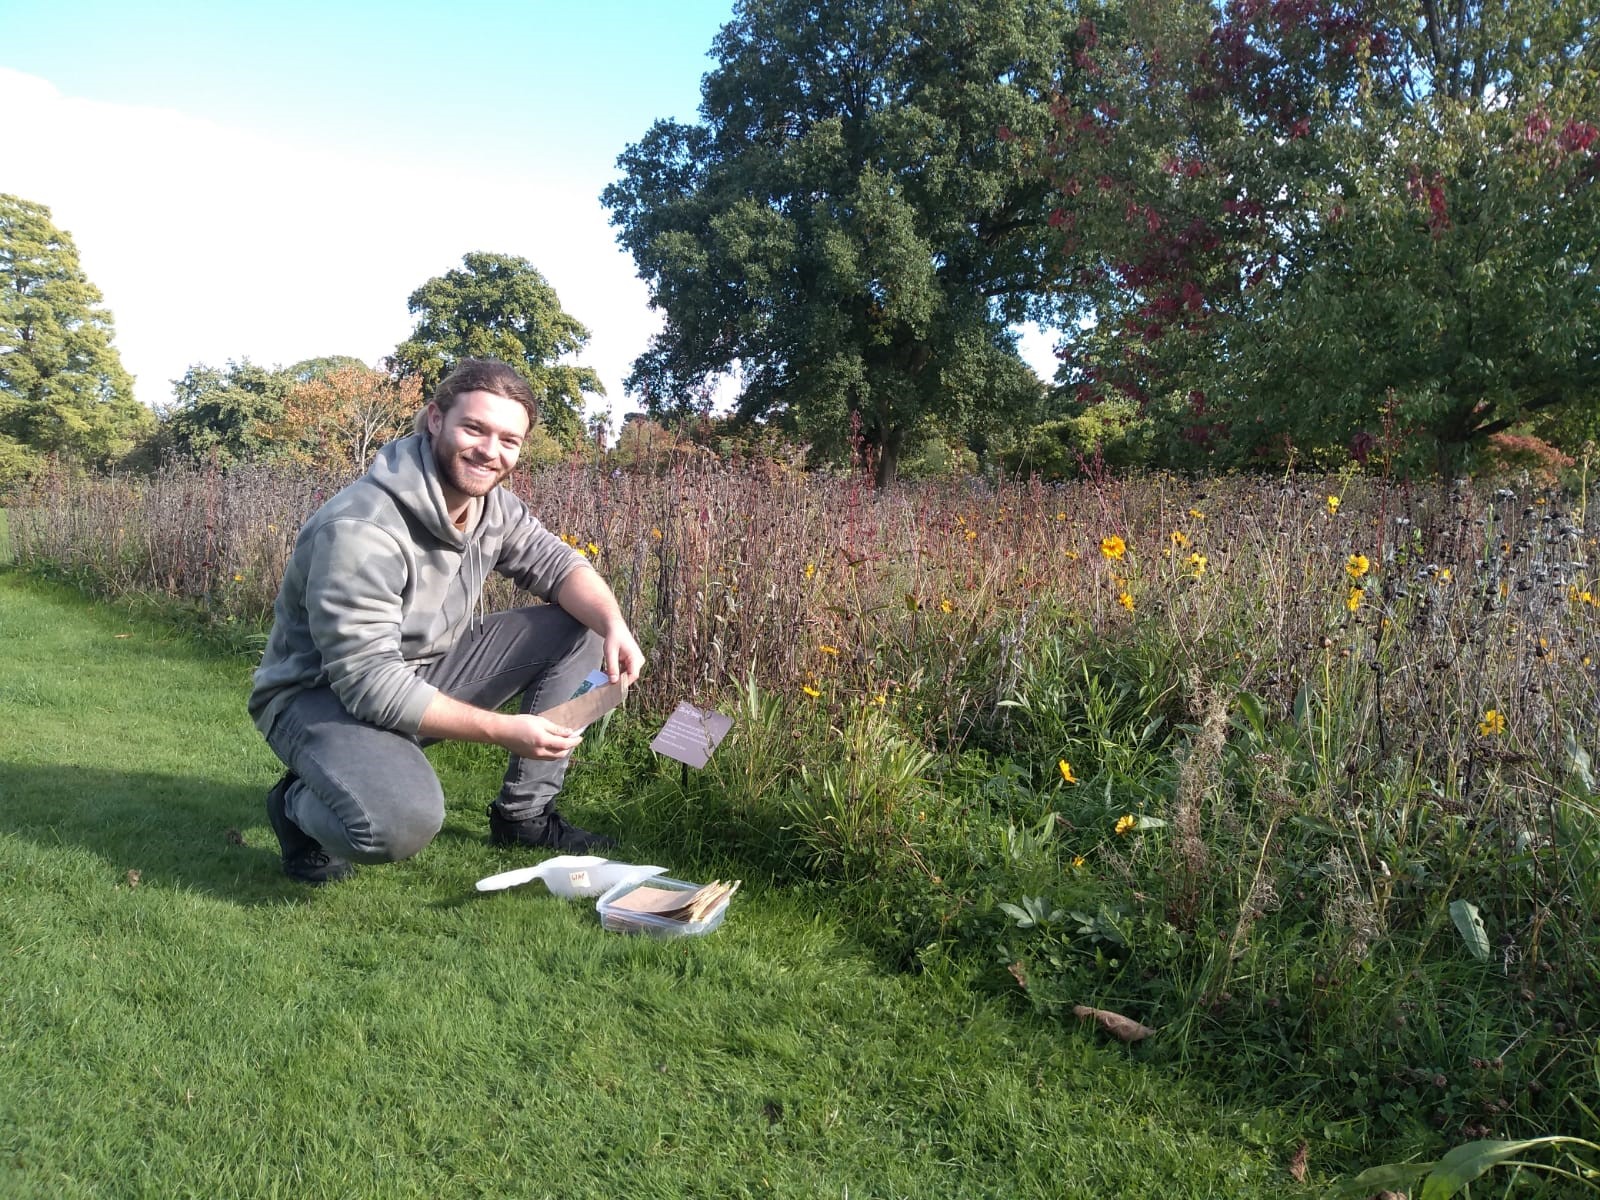 A man knelt down on a moxed piece of grass next to aa taller sward of plants some with yellow flowers. He is holding a paper envelope.